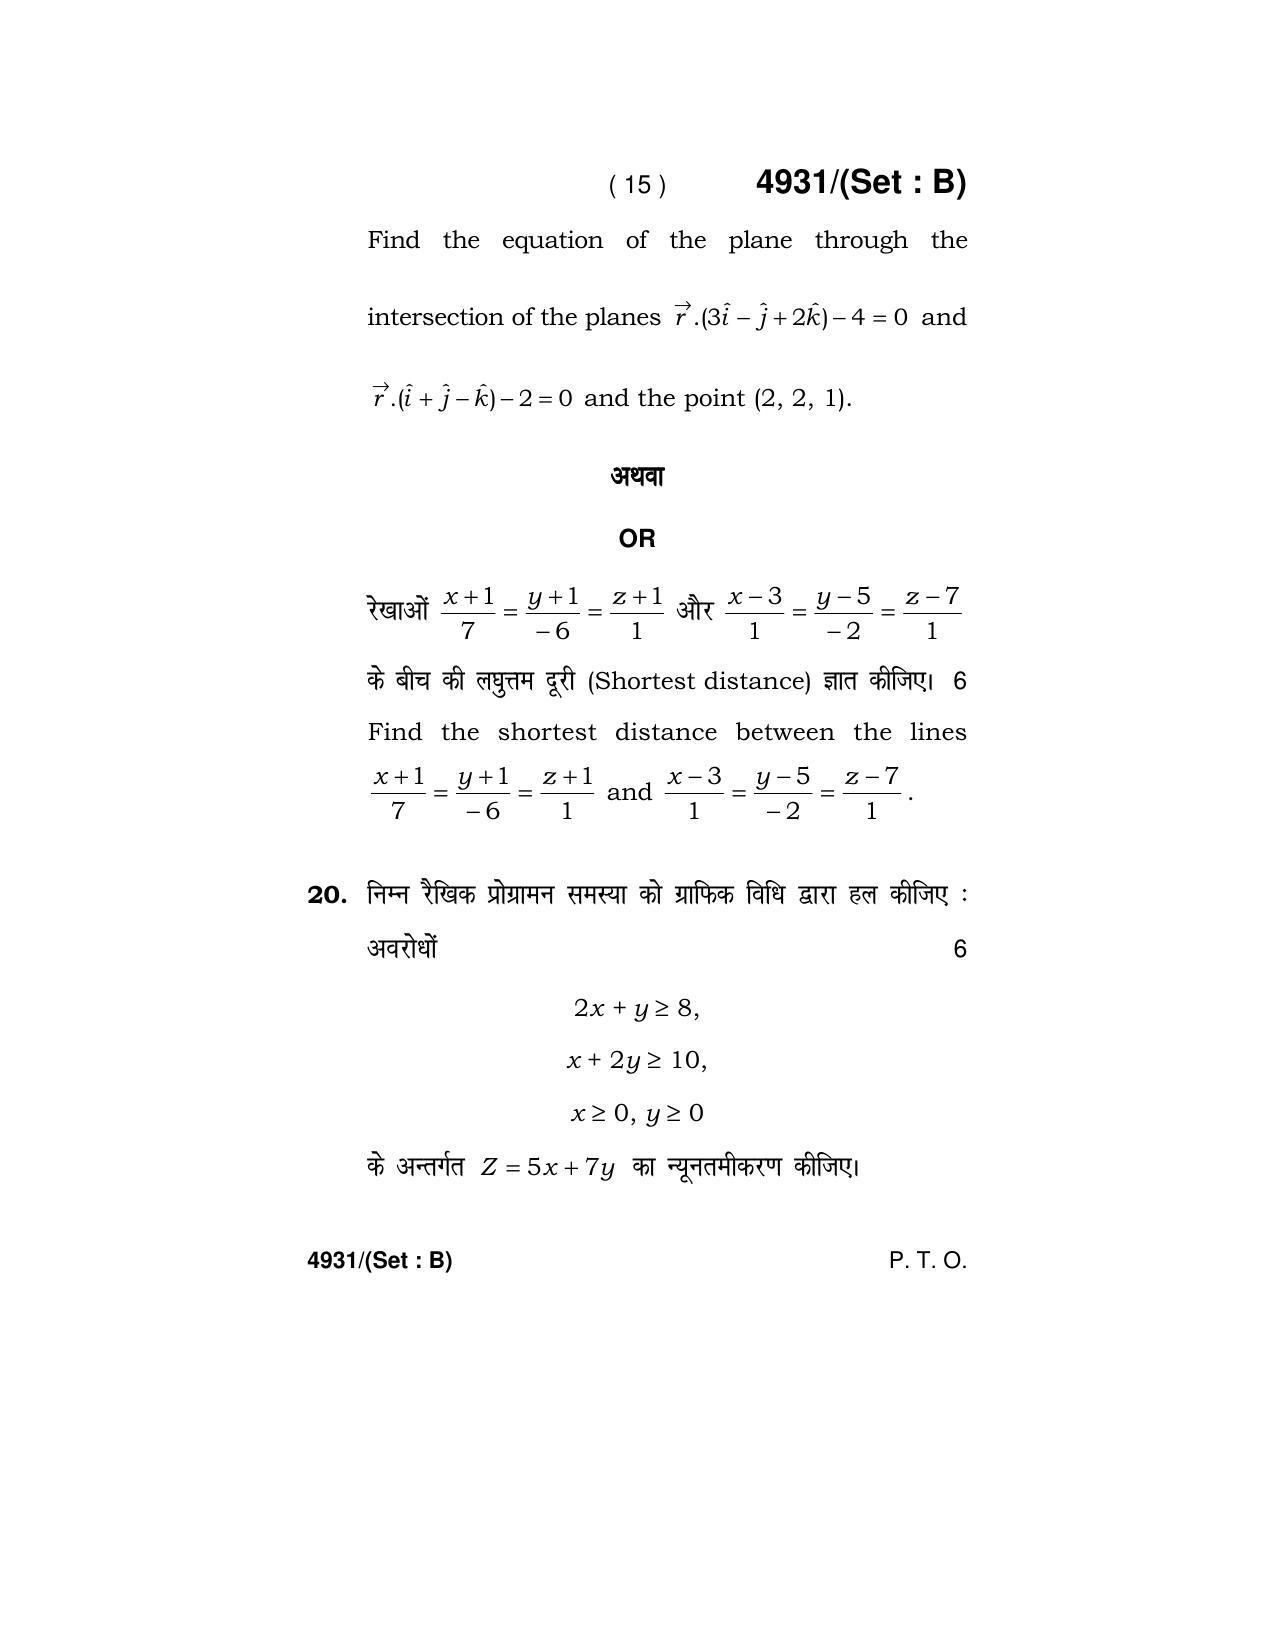 Haryana Board HBSE Class 12 Mathematics 2020 Question Paper - Page 31